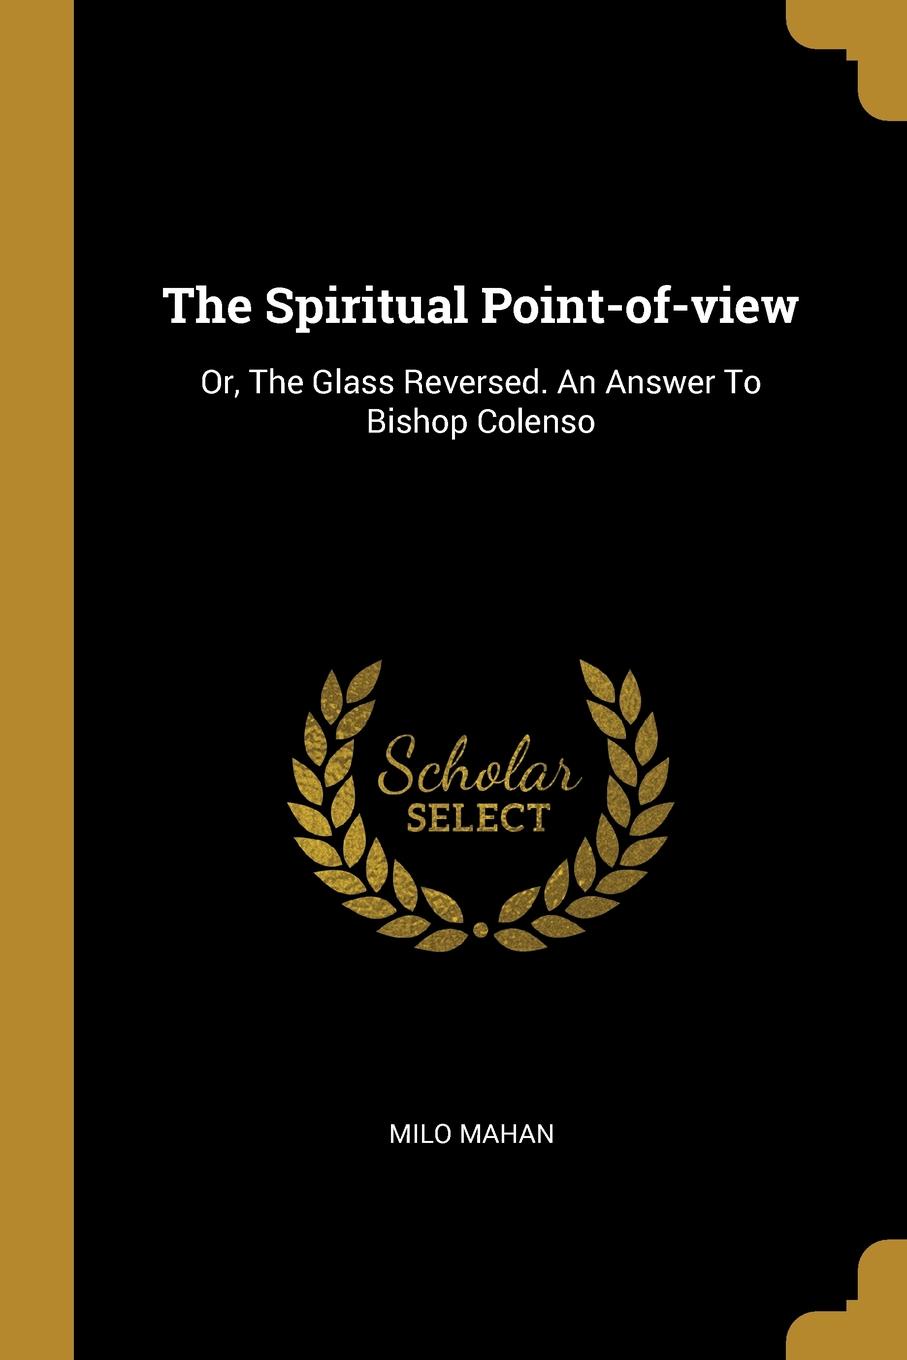 The Spiritual Point-of-view. Or, The Glass Reversed. An Answer To Bishop Colenso